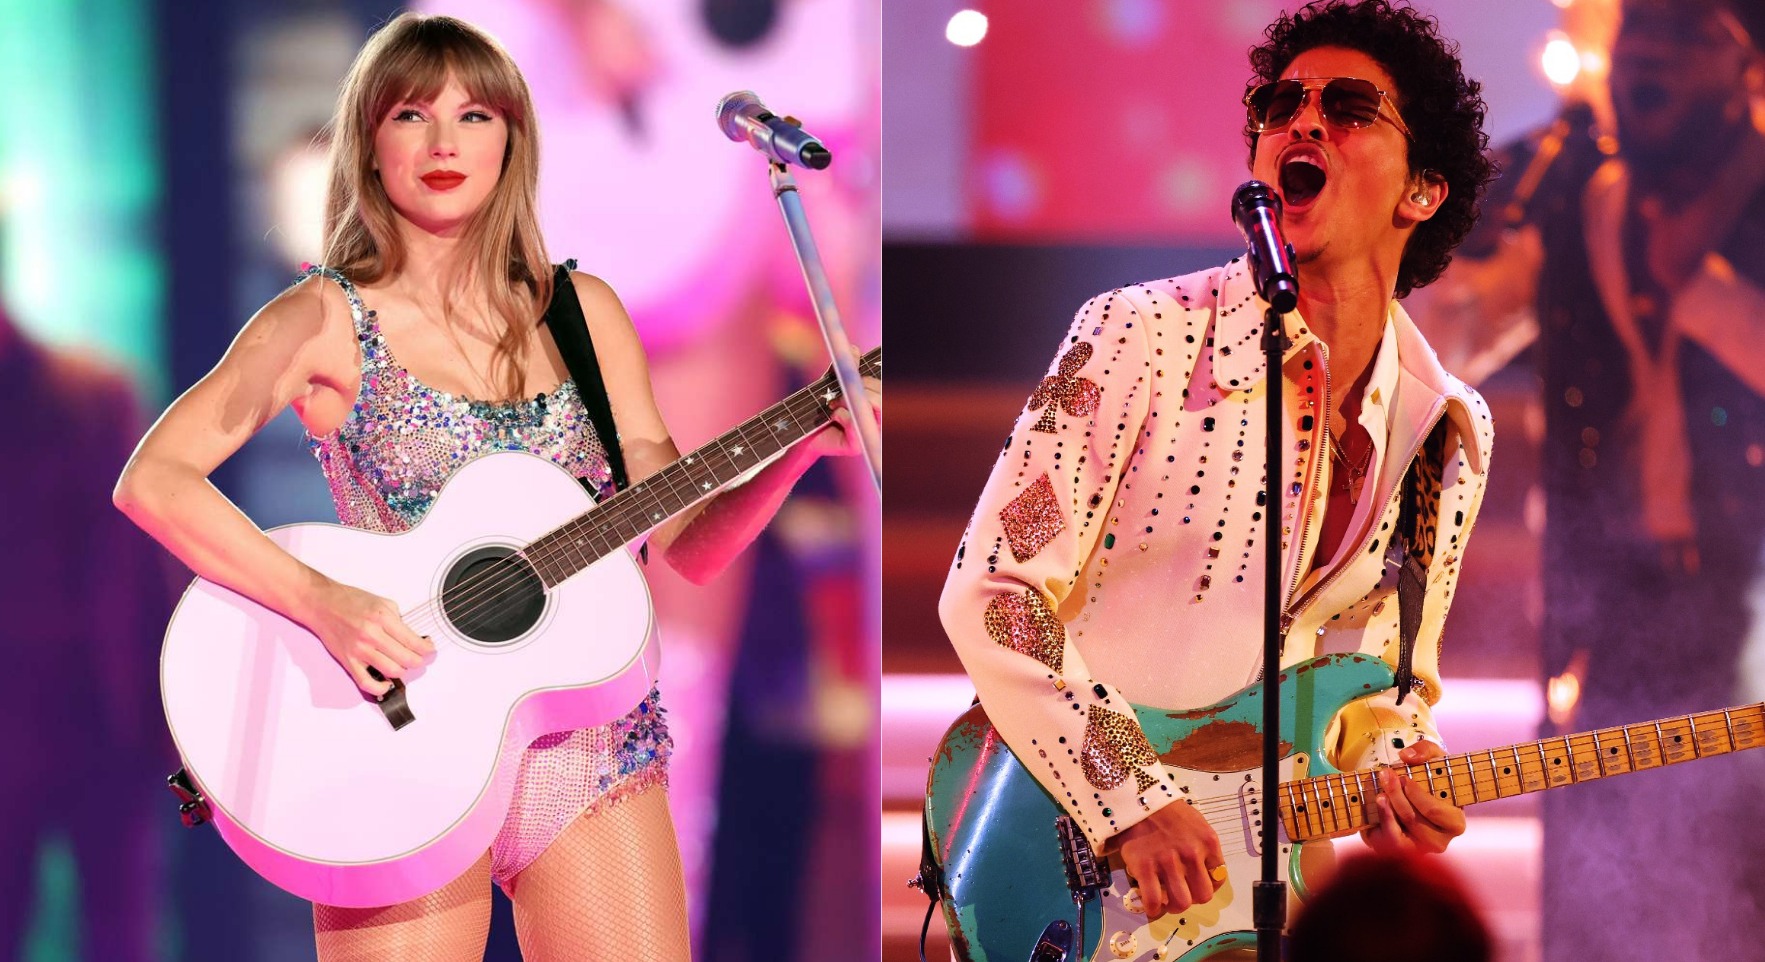 Extra Tickets Released for Bruno Mars and Taylor Swift’s Singapore Concerts